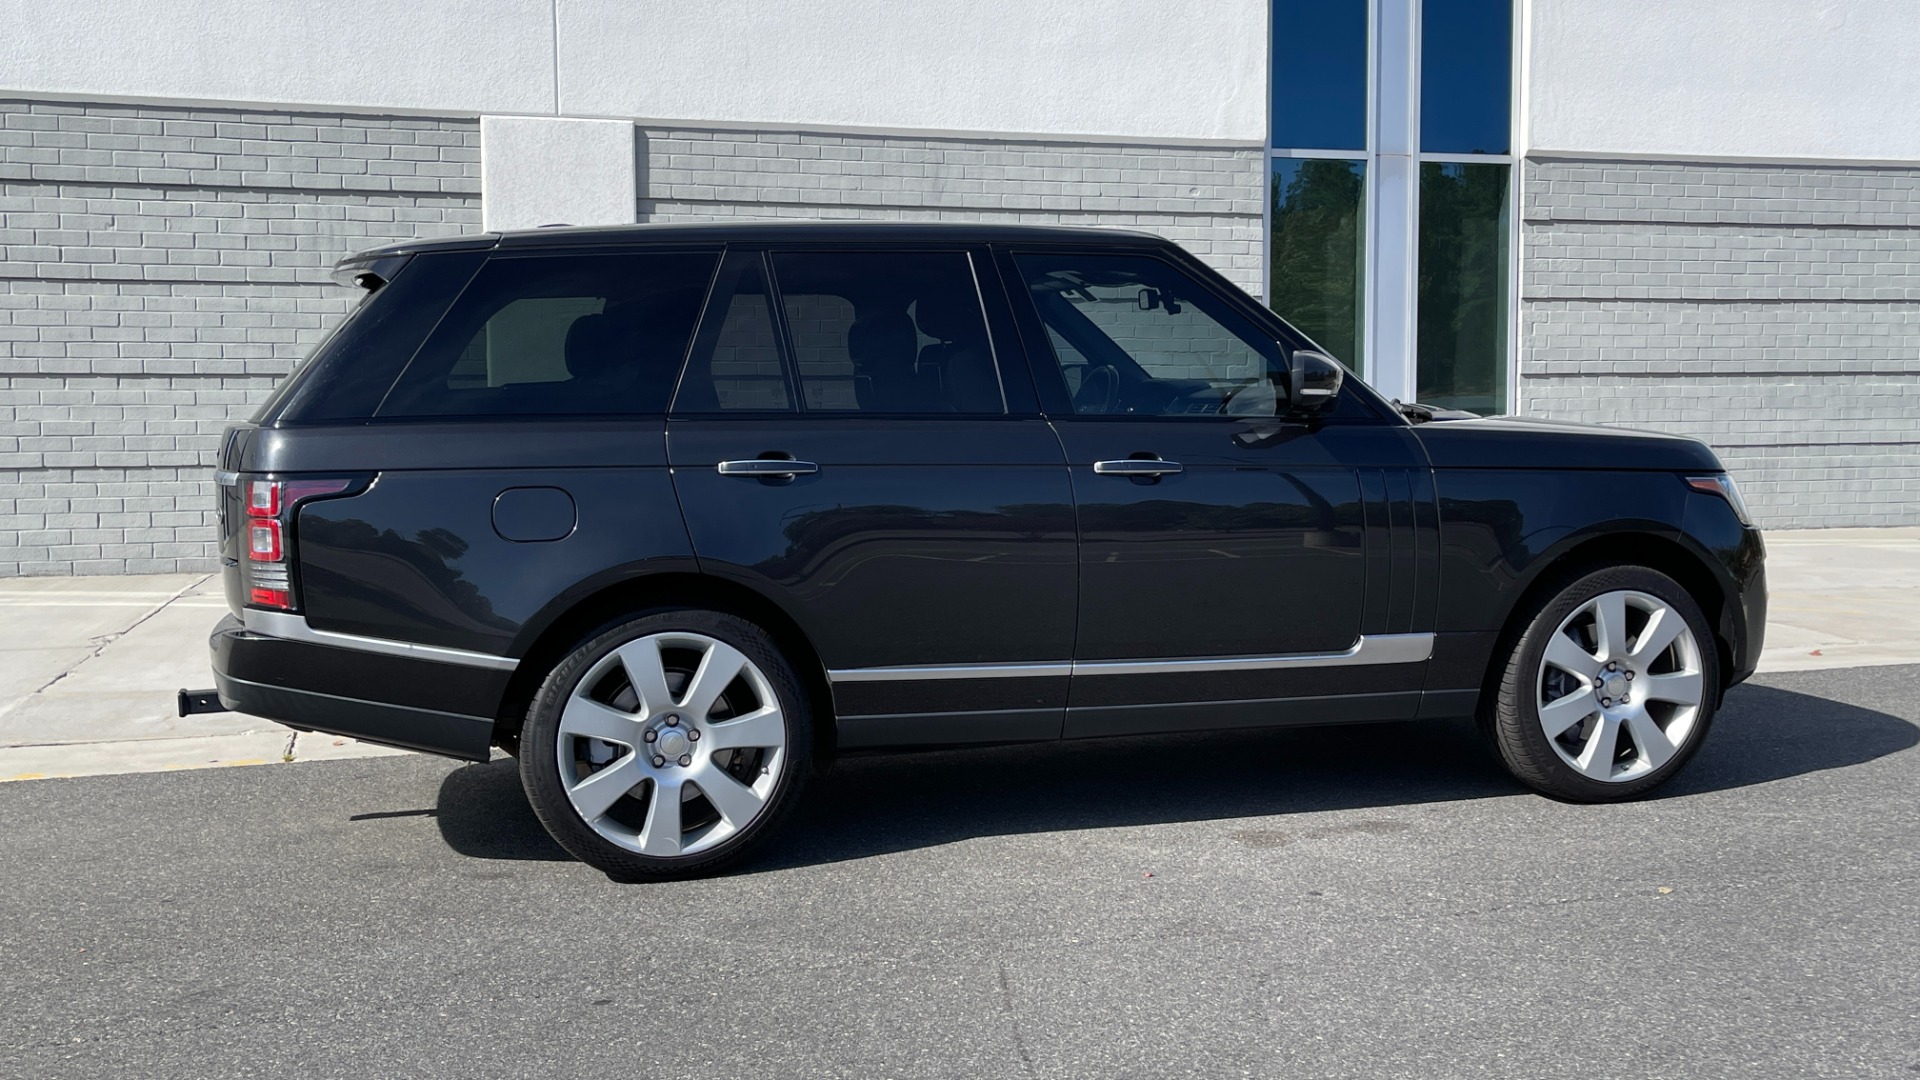 Used 2014 Land Rover Range Rover Supercharged Autobiography / 22IN WHEELS / PREMIUM PAINT / MASSAGE for sale $42,975 at Formula Imports in Charlotte NC 28227 8